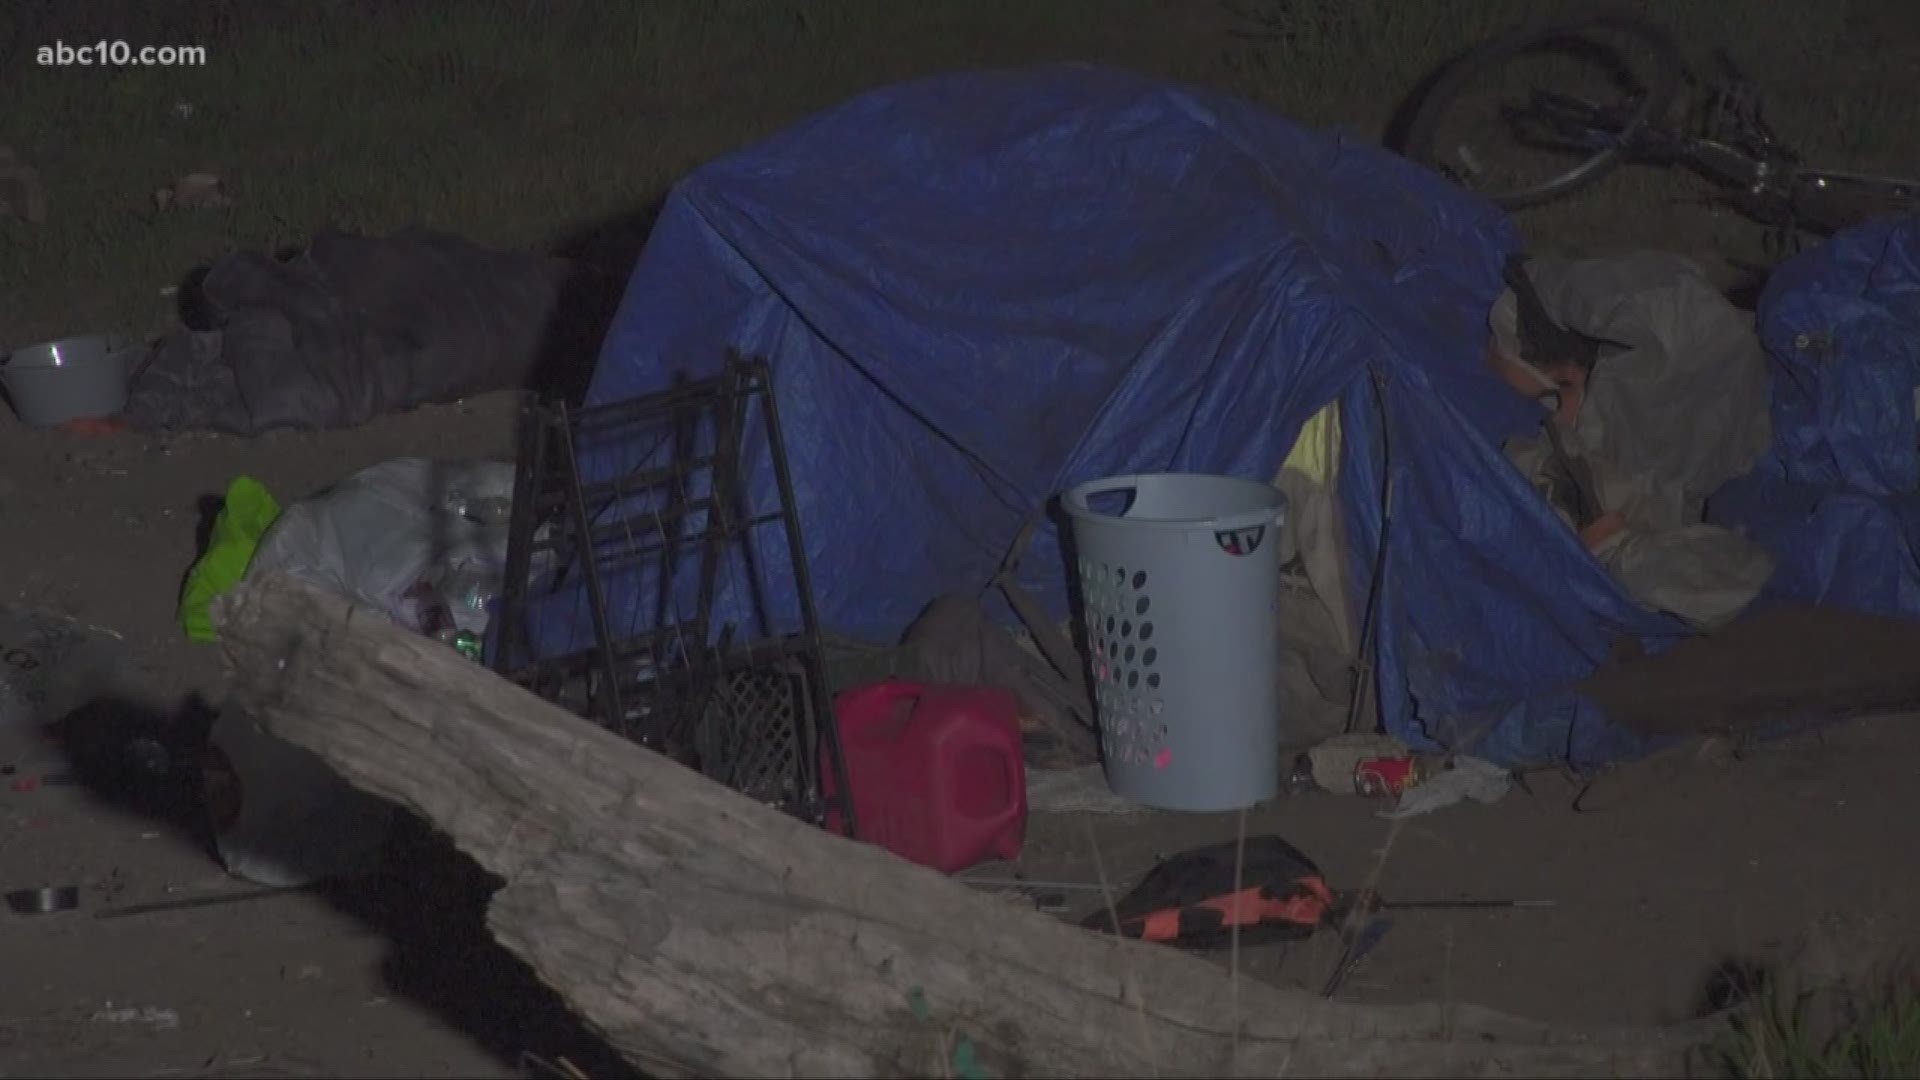 City officials are expected to discuss a law that would prevent people from camping within 25 feet from the riverfront levees and other public facilities.